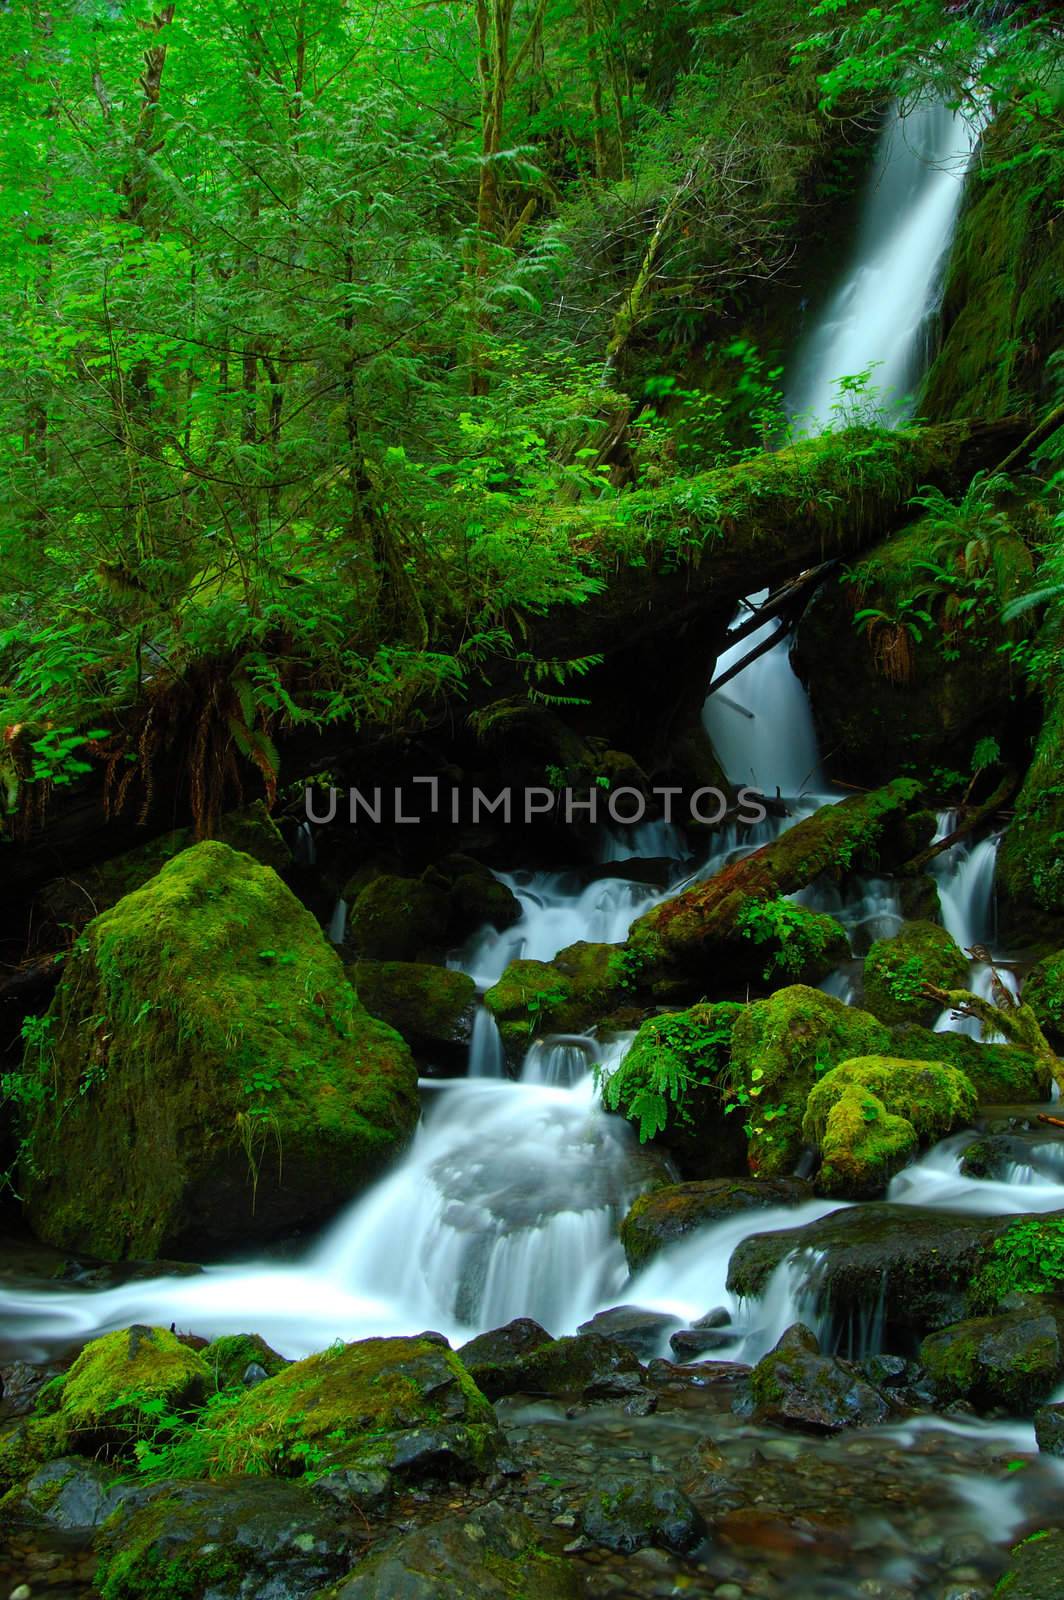 Merrymere falls in Olympic National Park